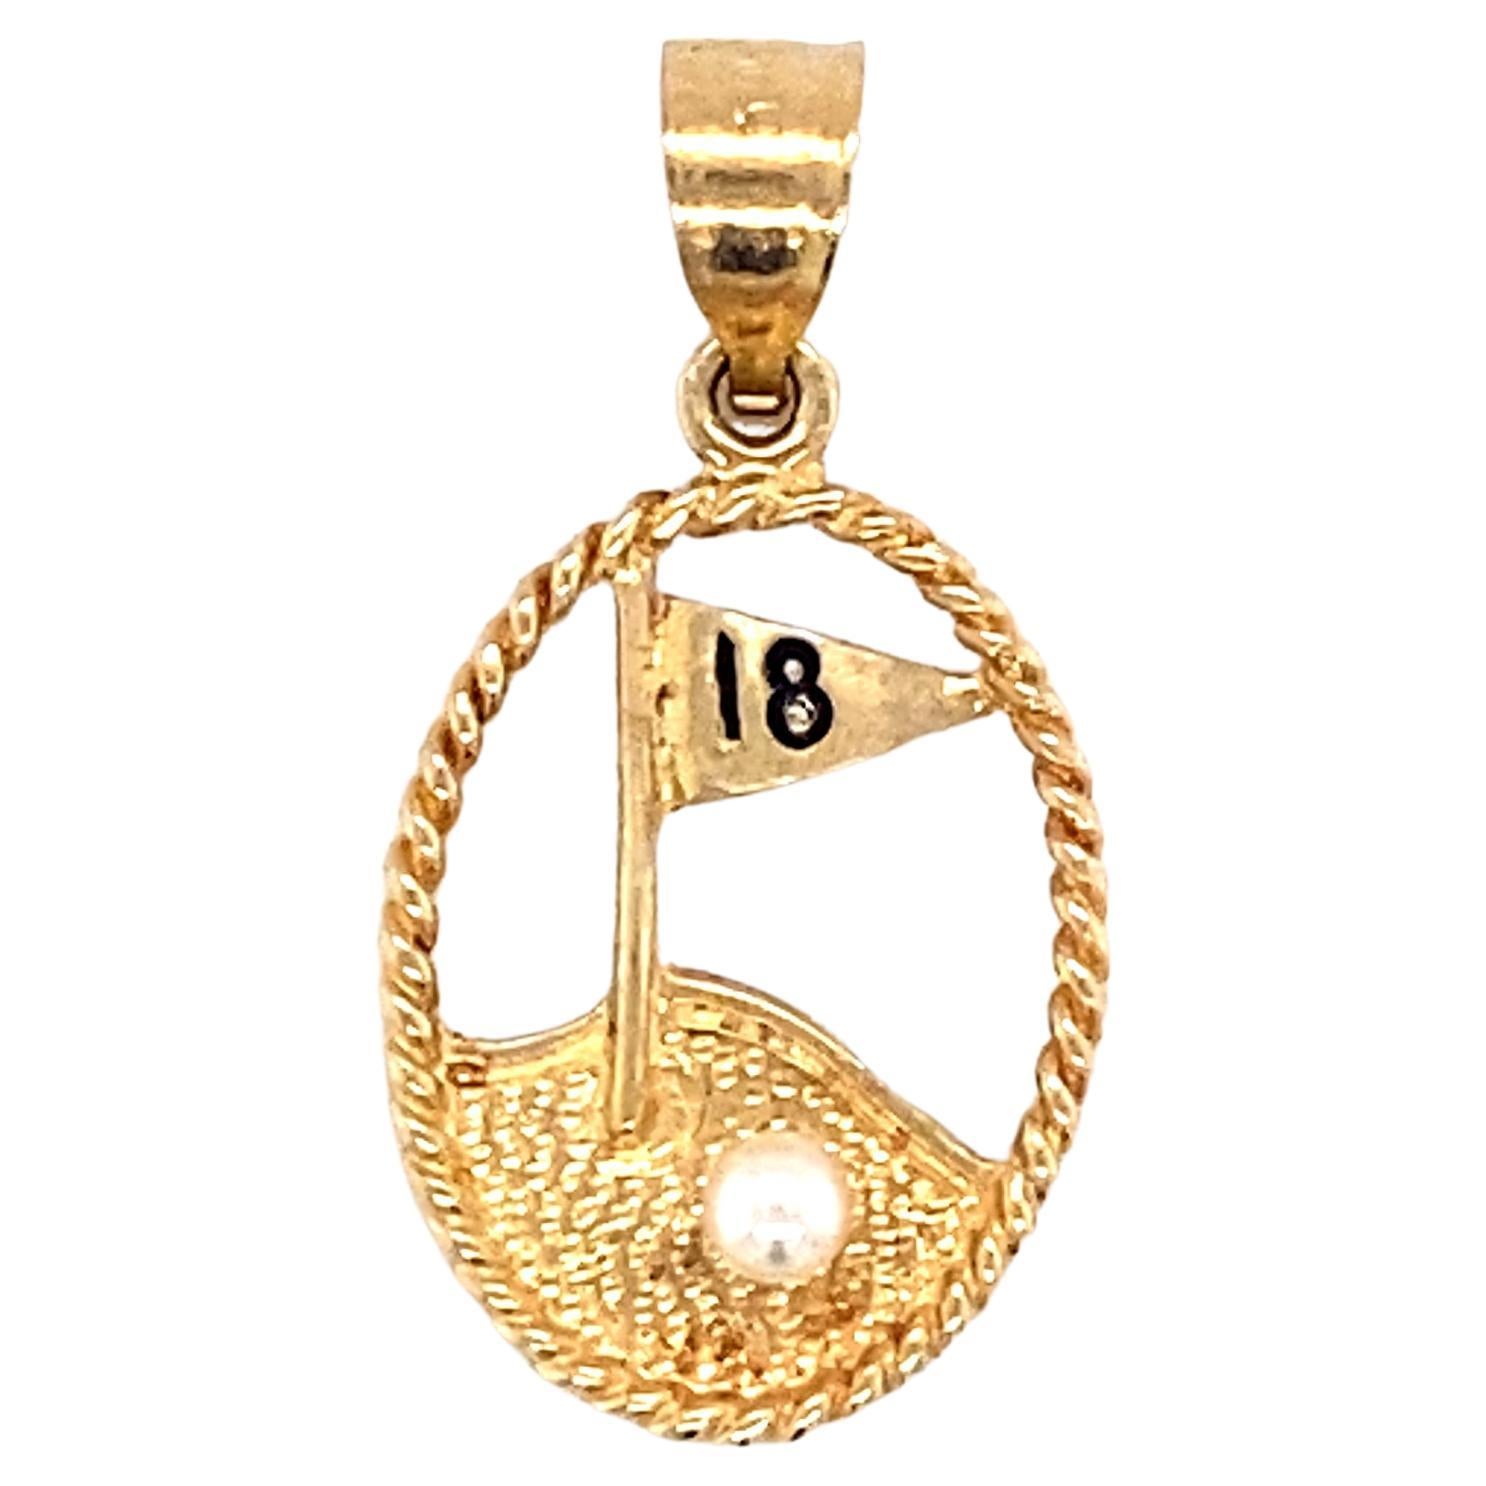 Circa 1980s 18th Hole Golf Charm with Pearl in 14 Karat Gold